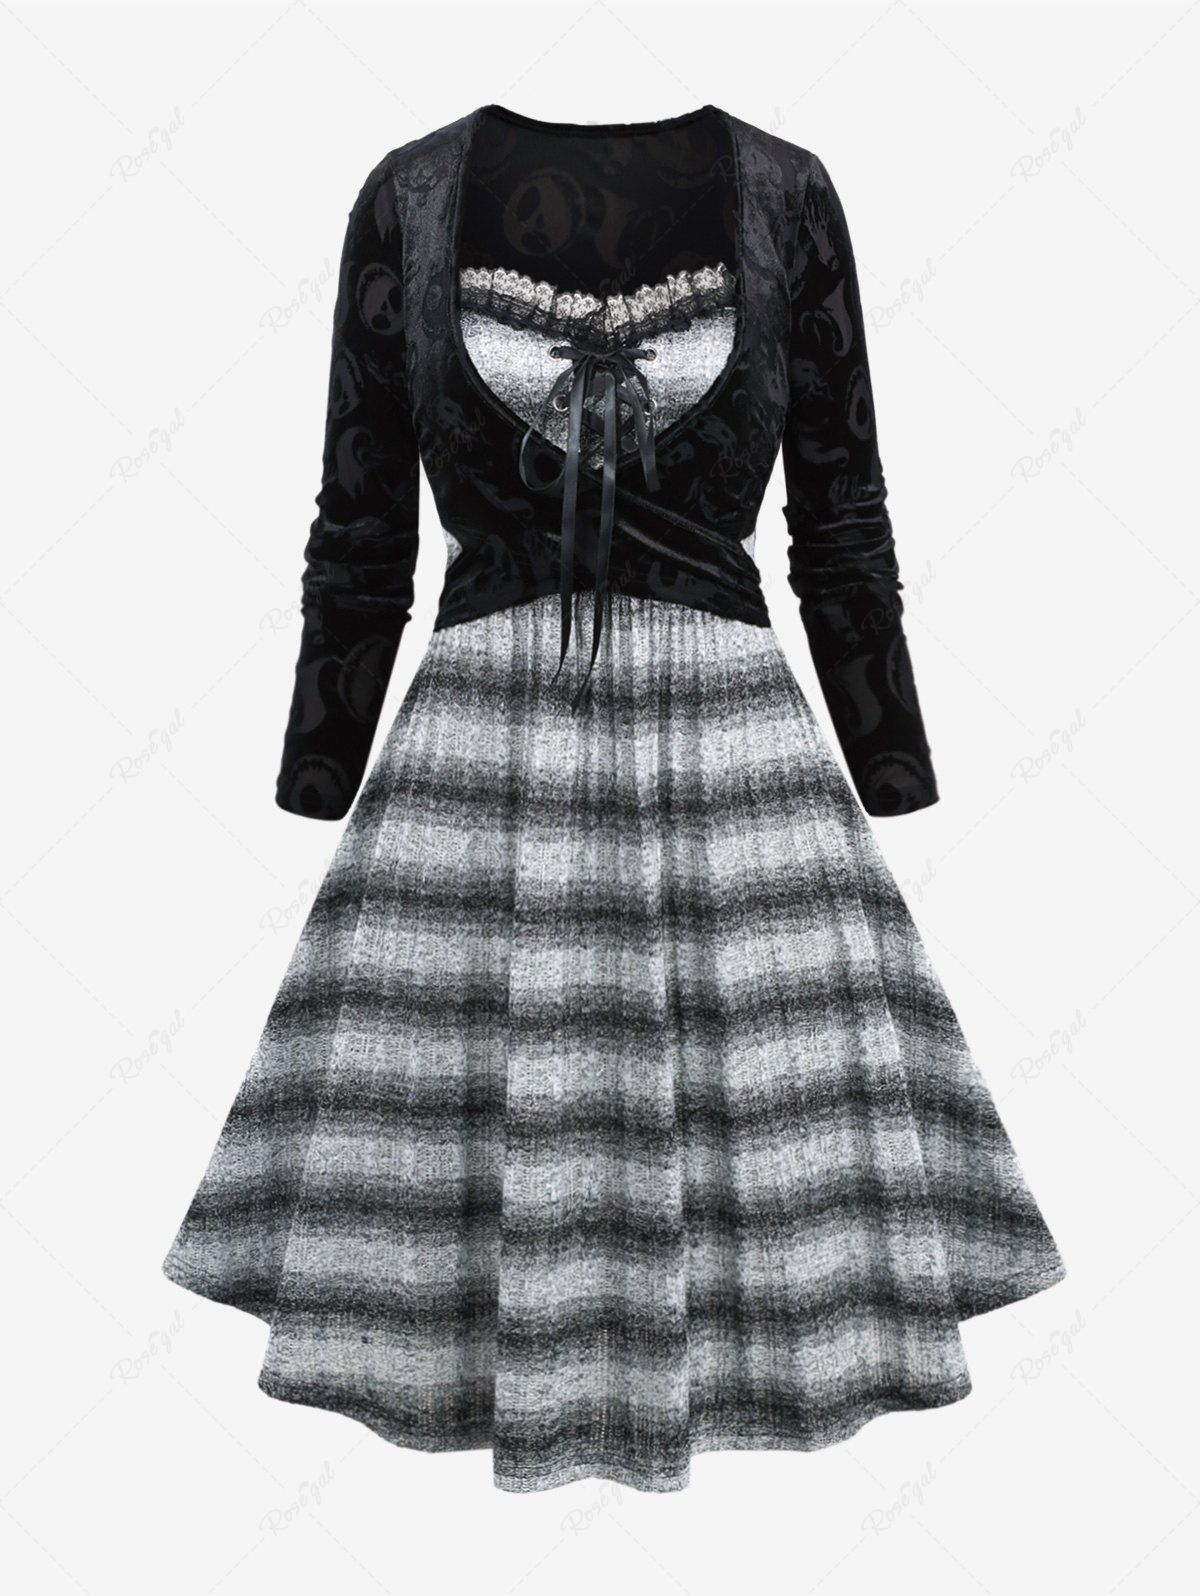 Buy Plus Size Skull Ghost Flocking Crossover Lace-up Ruffle Lace Striped Knitted Halloween 2 in 1 Dress  